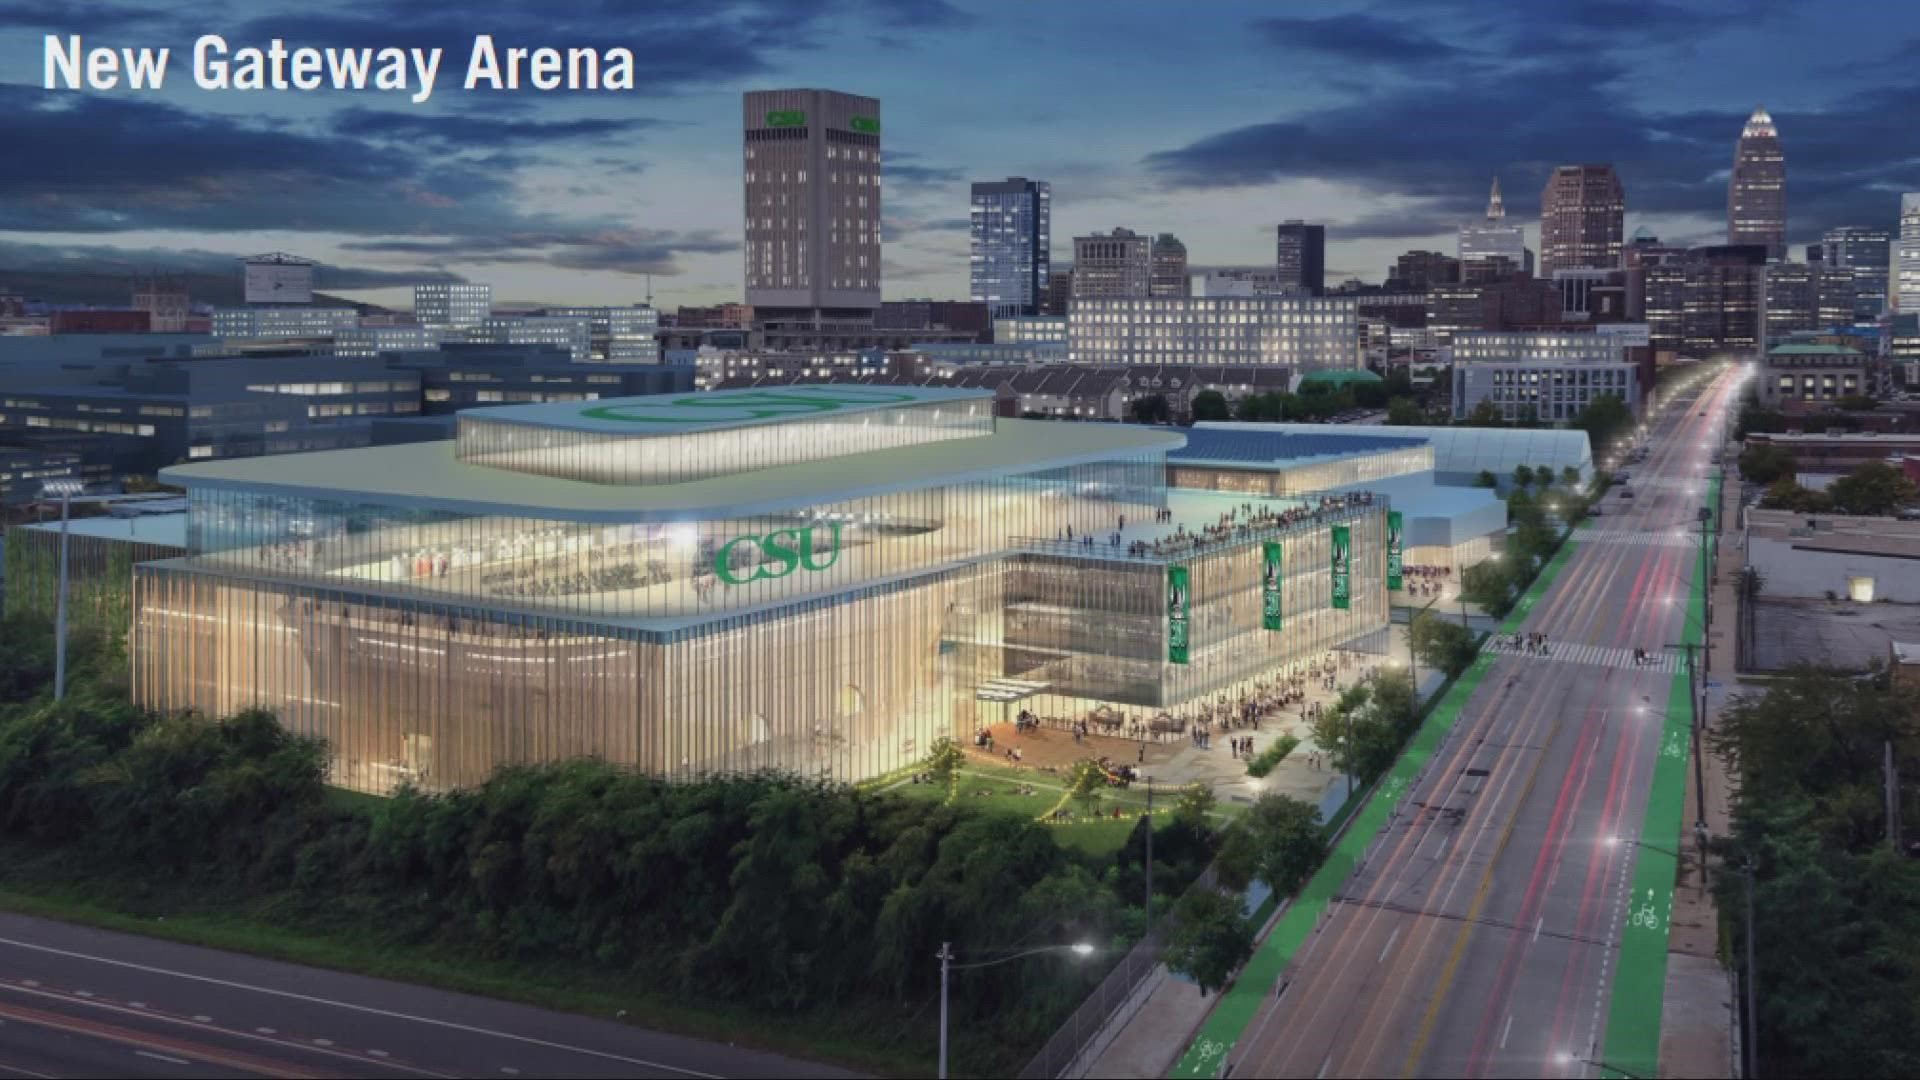 The 10-year, $650 million master plan is highlighted by the addition of a 5,000 to 7,000-seat multi-purpose arena that would replace the aging Wolstein Center.